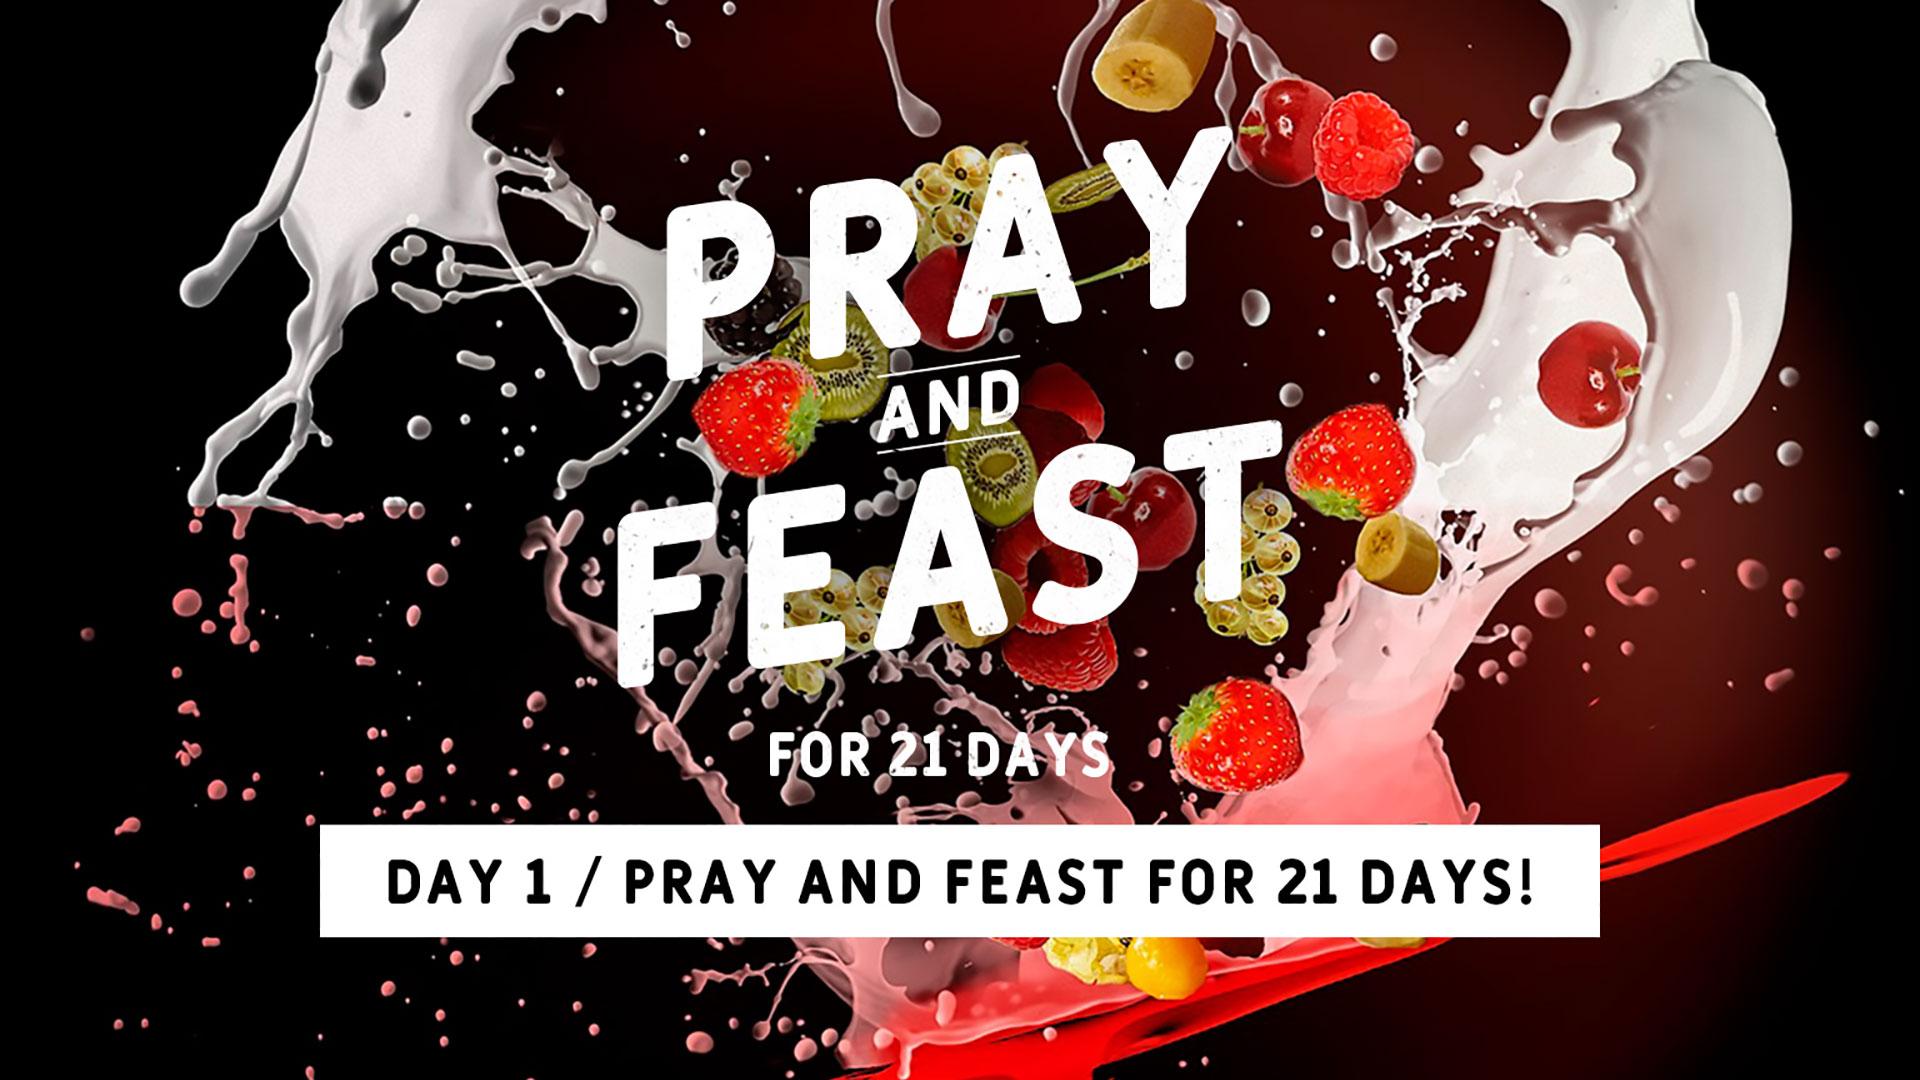 Featured image for “DAY 1 – Pray and Feast for 21 Days!”